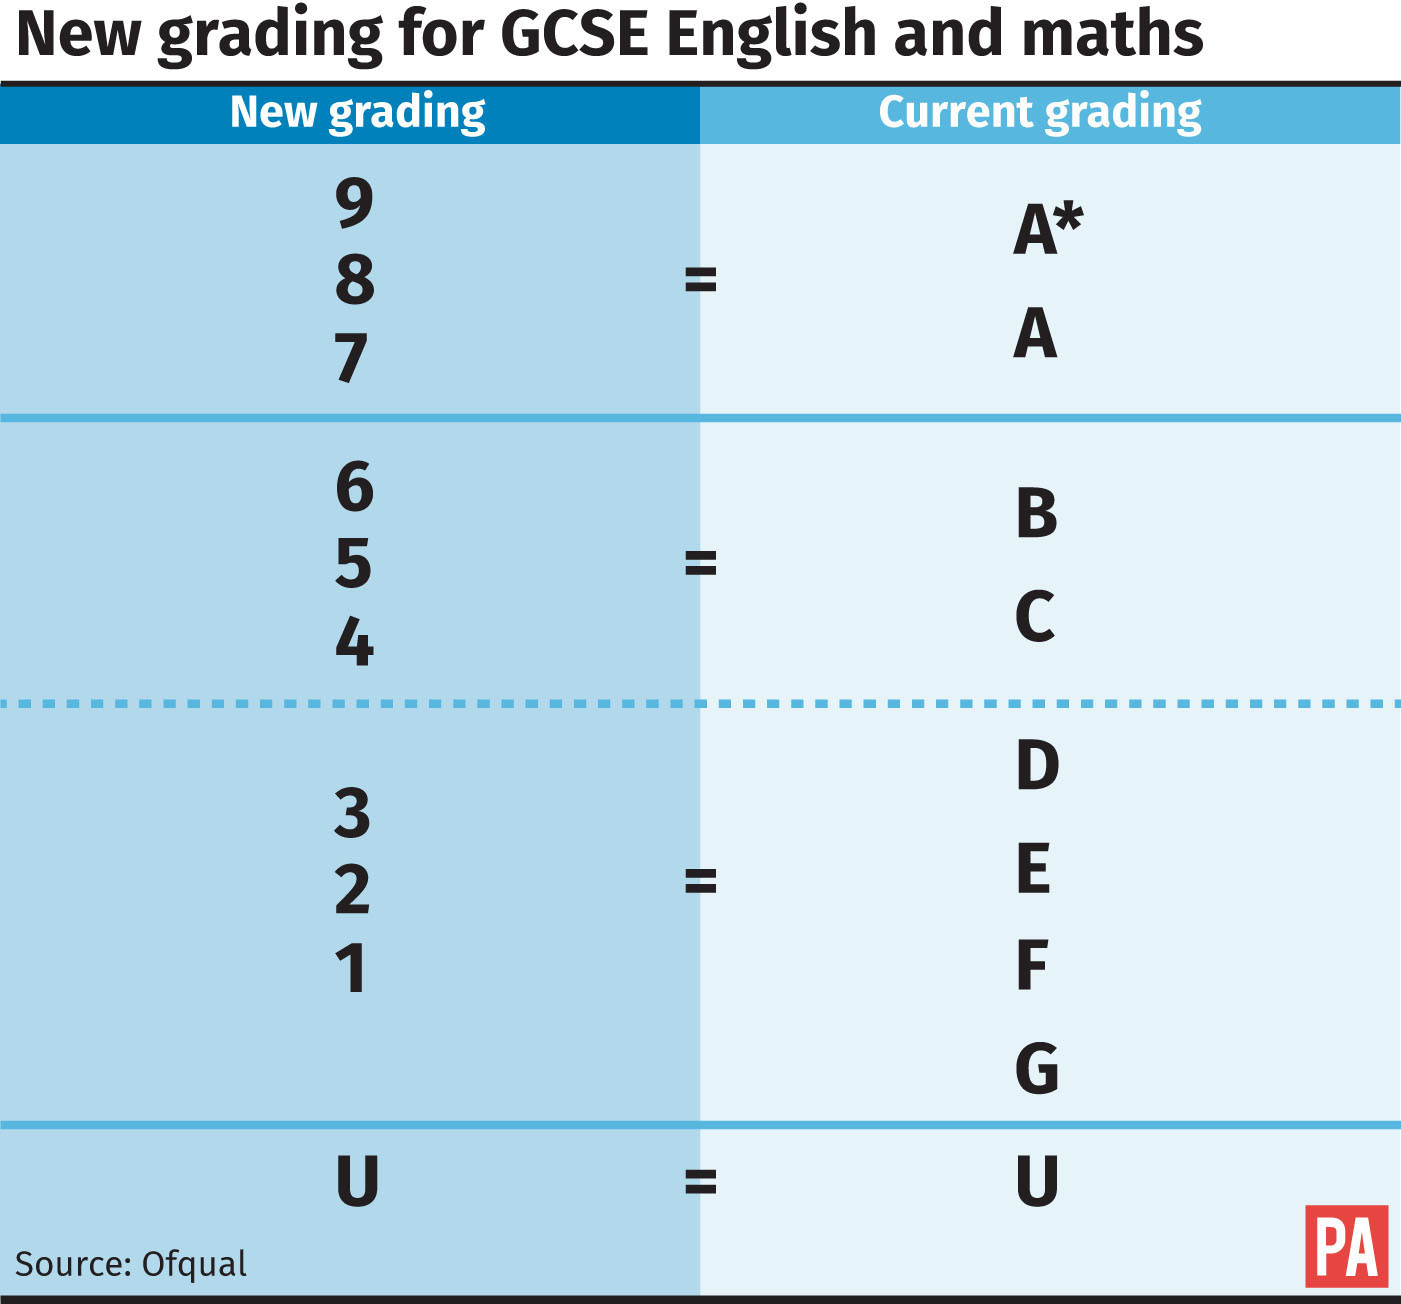 The new grading system for GCSEs